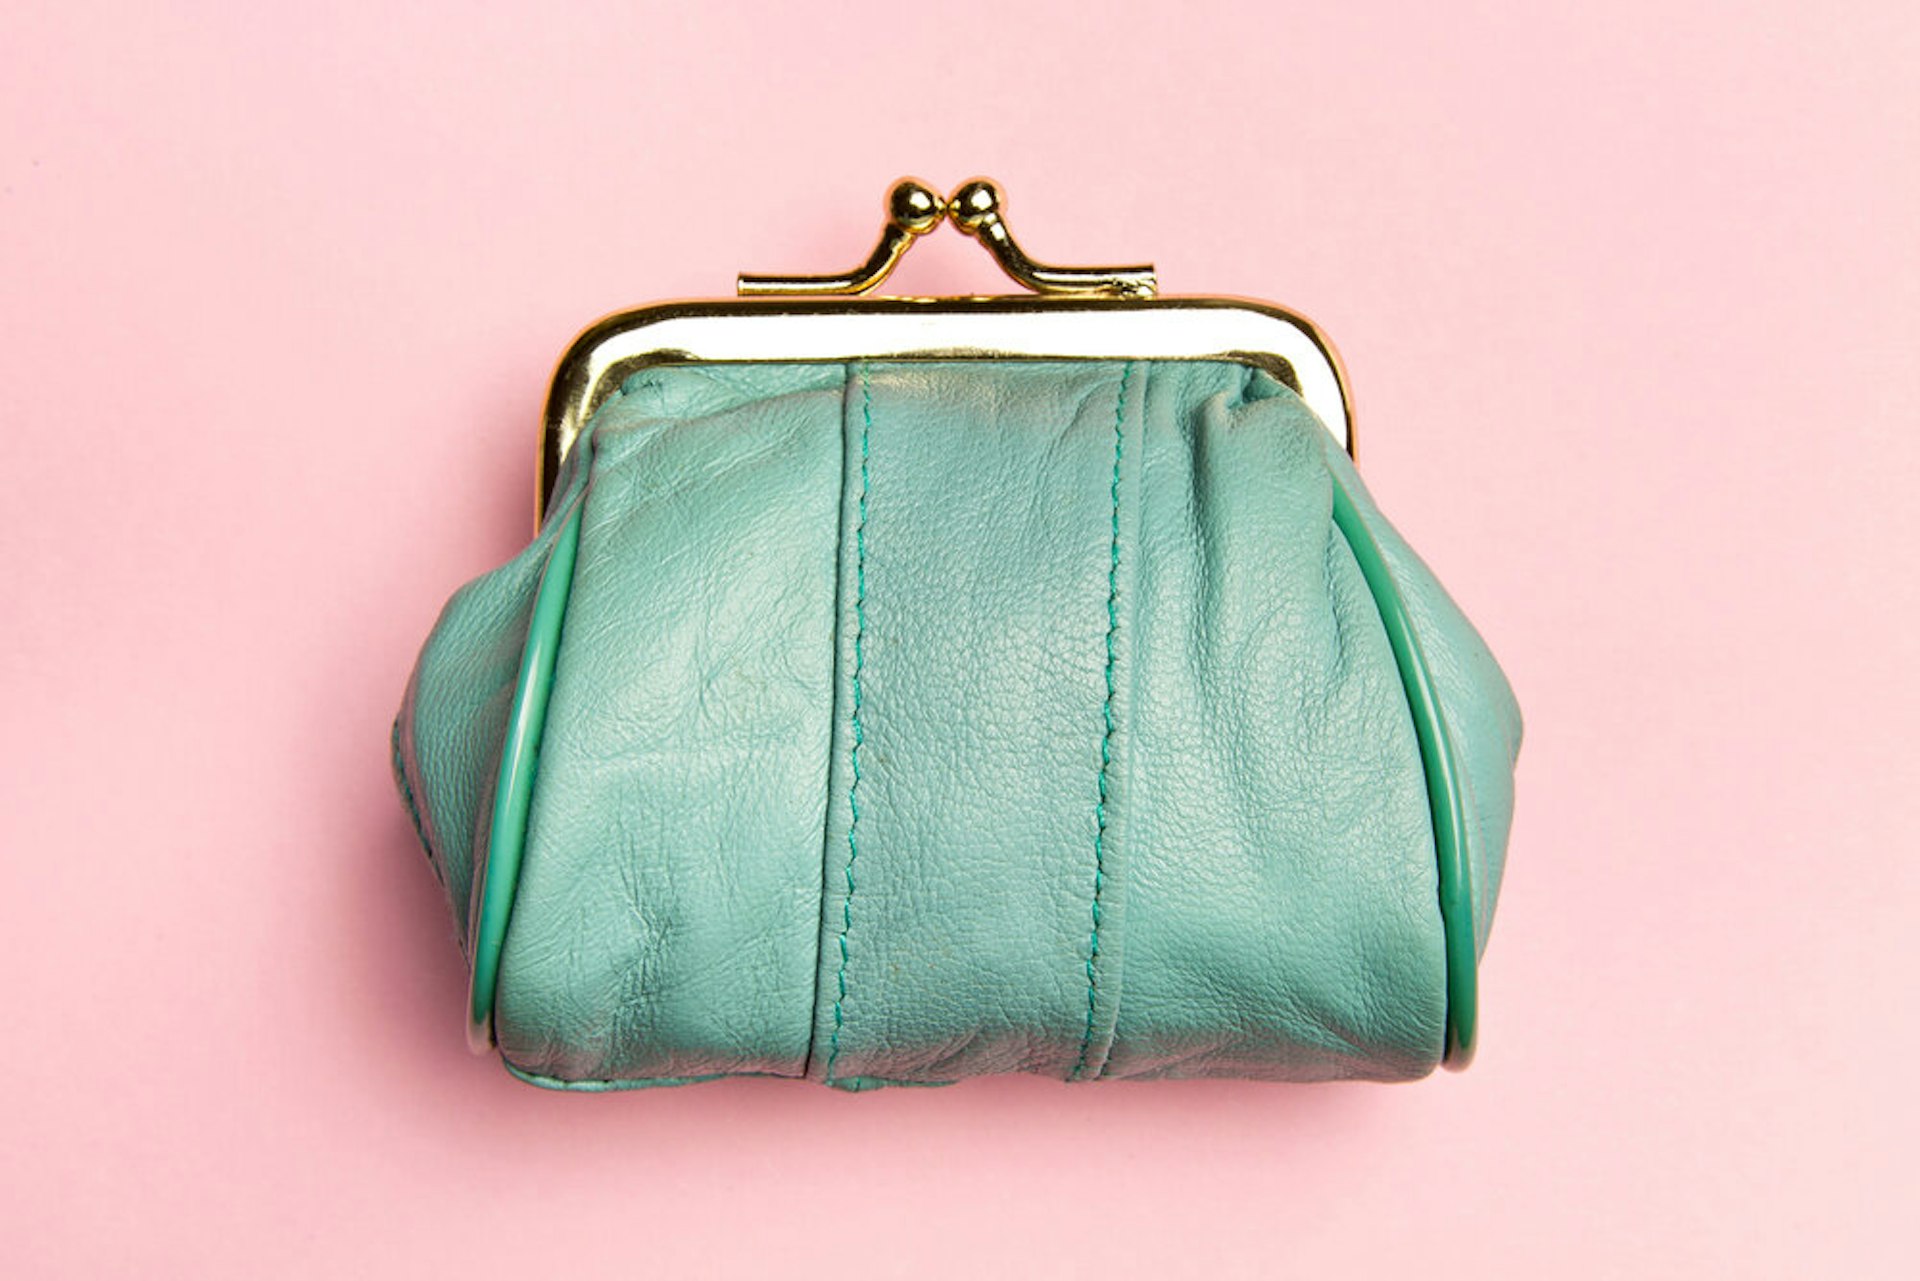 A green leather purse on a pink background